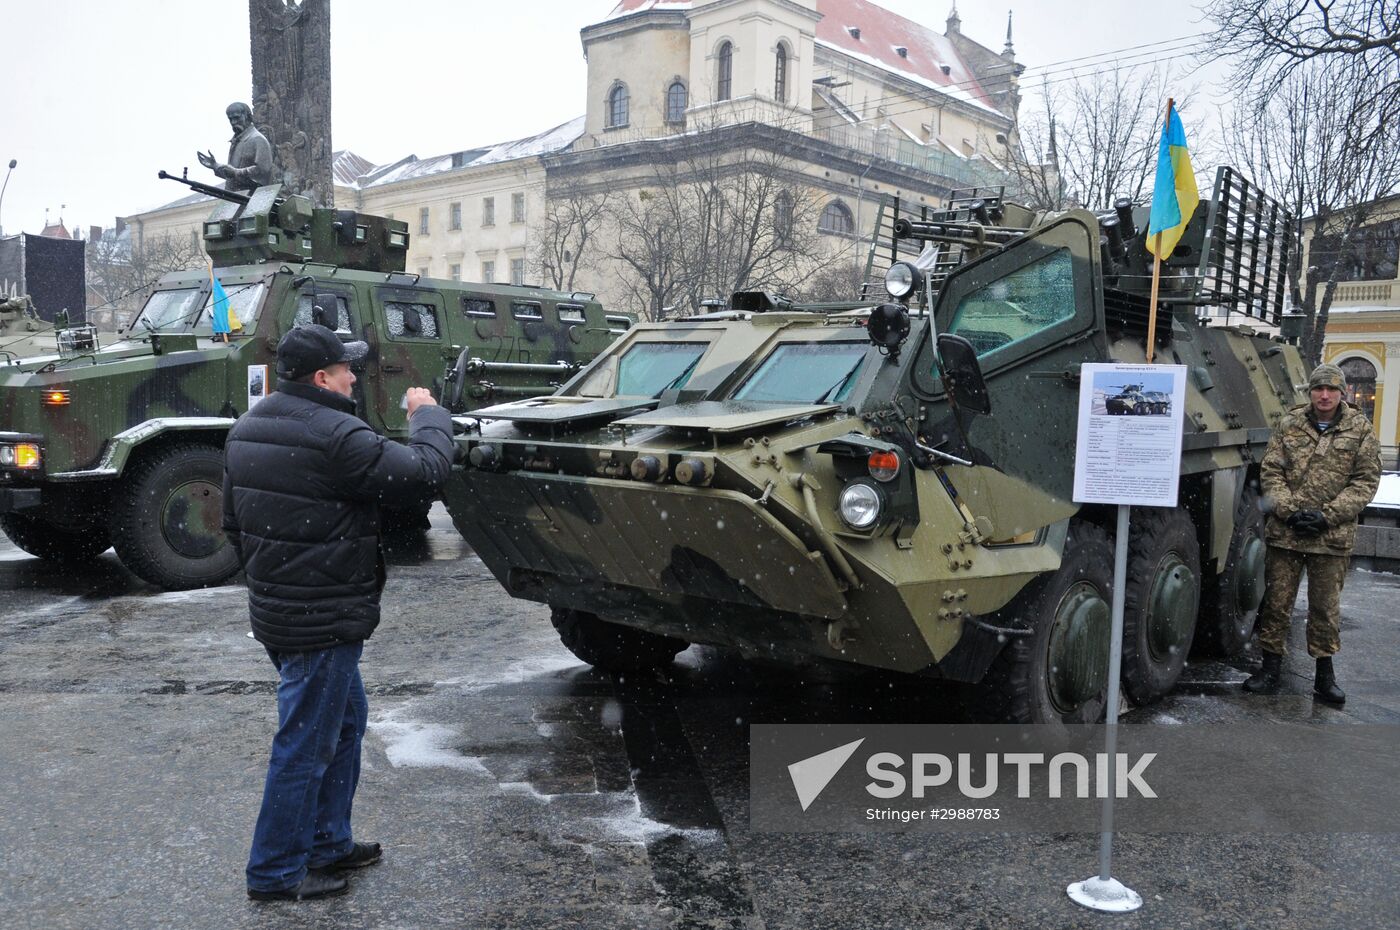 25th anniversary of Ukrainian Armed Forces in Lvov